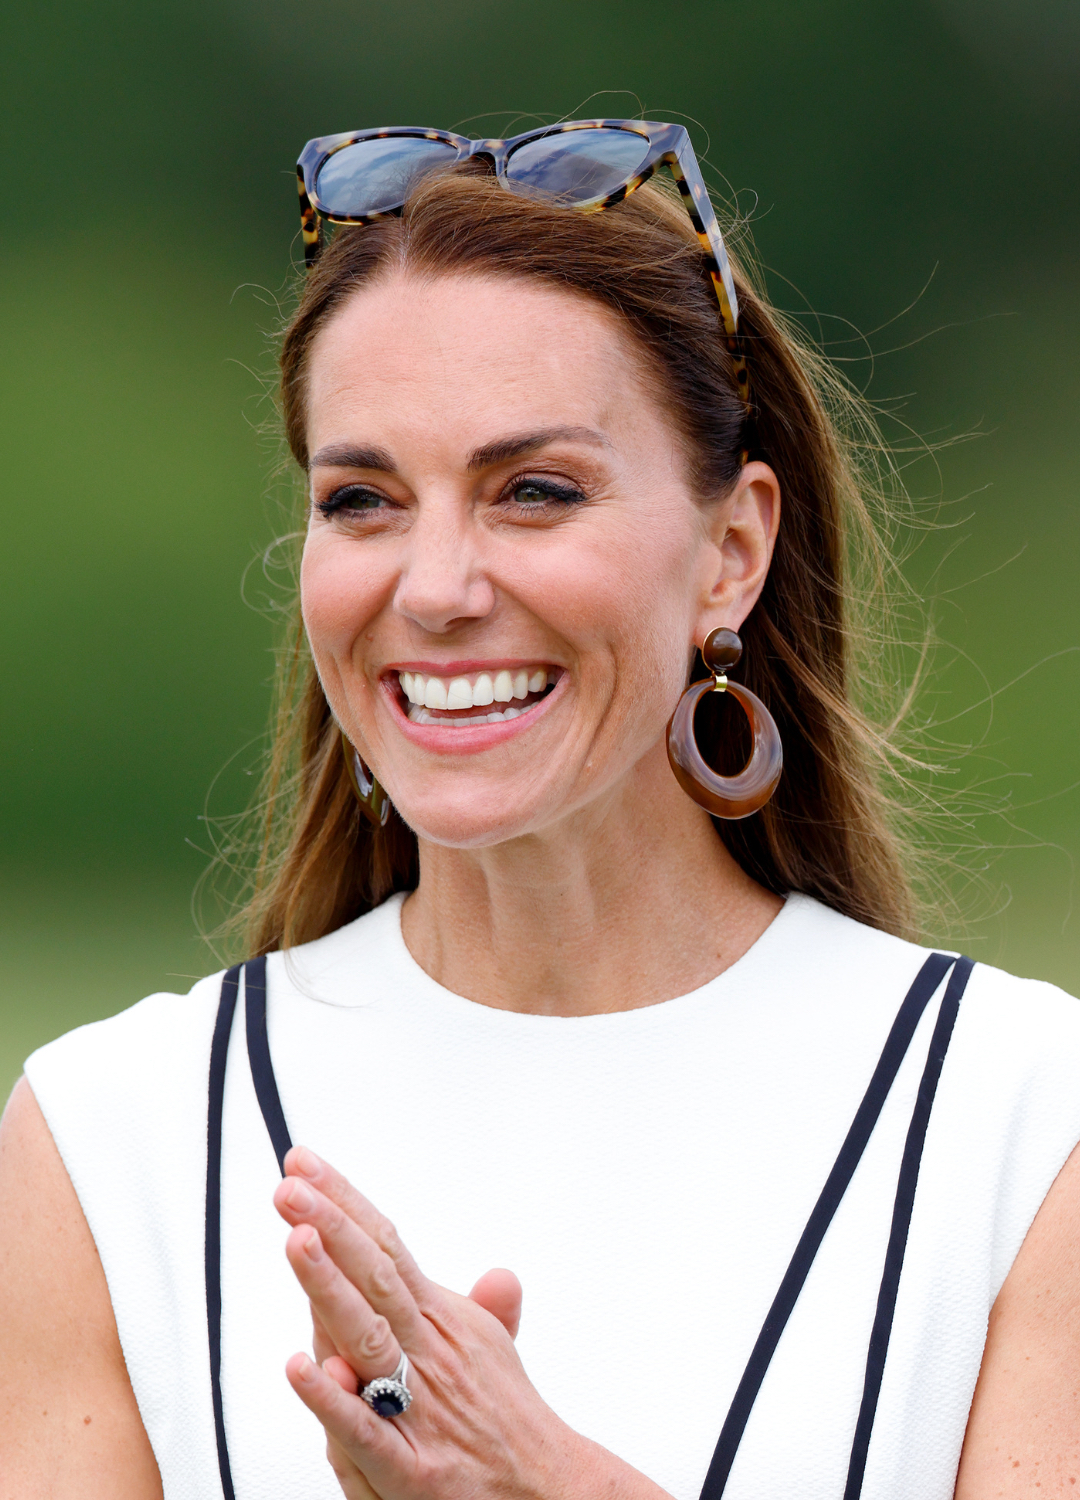 Catherine, Duchess of Cambridge attends the Out-Sourcing Inc. Royal Charity Polo Cup at Guards Polo Club, Flemish Farm on July 6, 2022 in Windsor, England